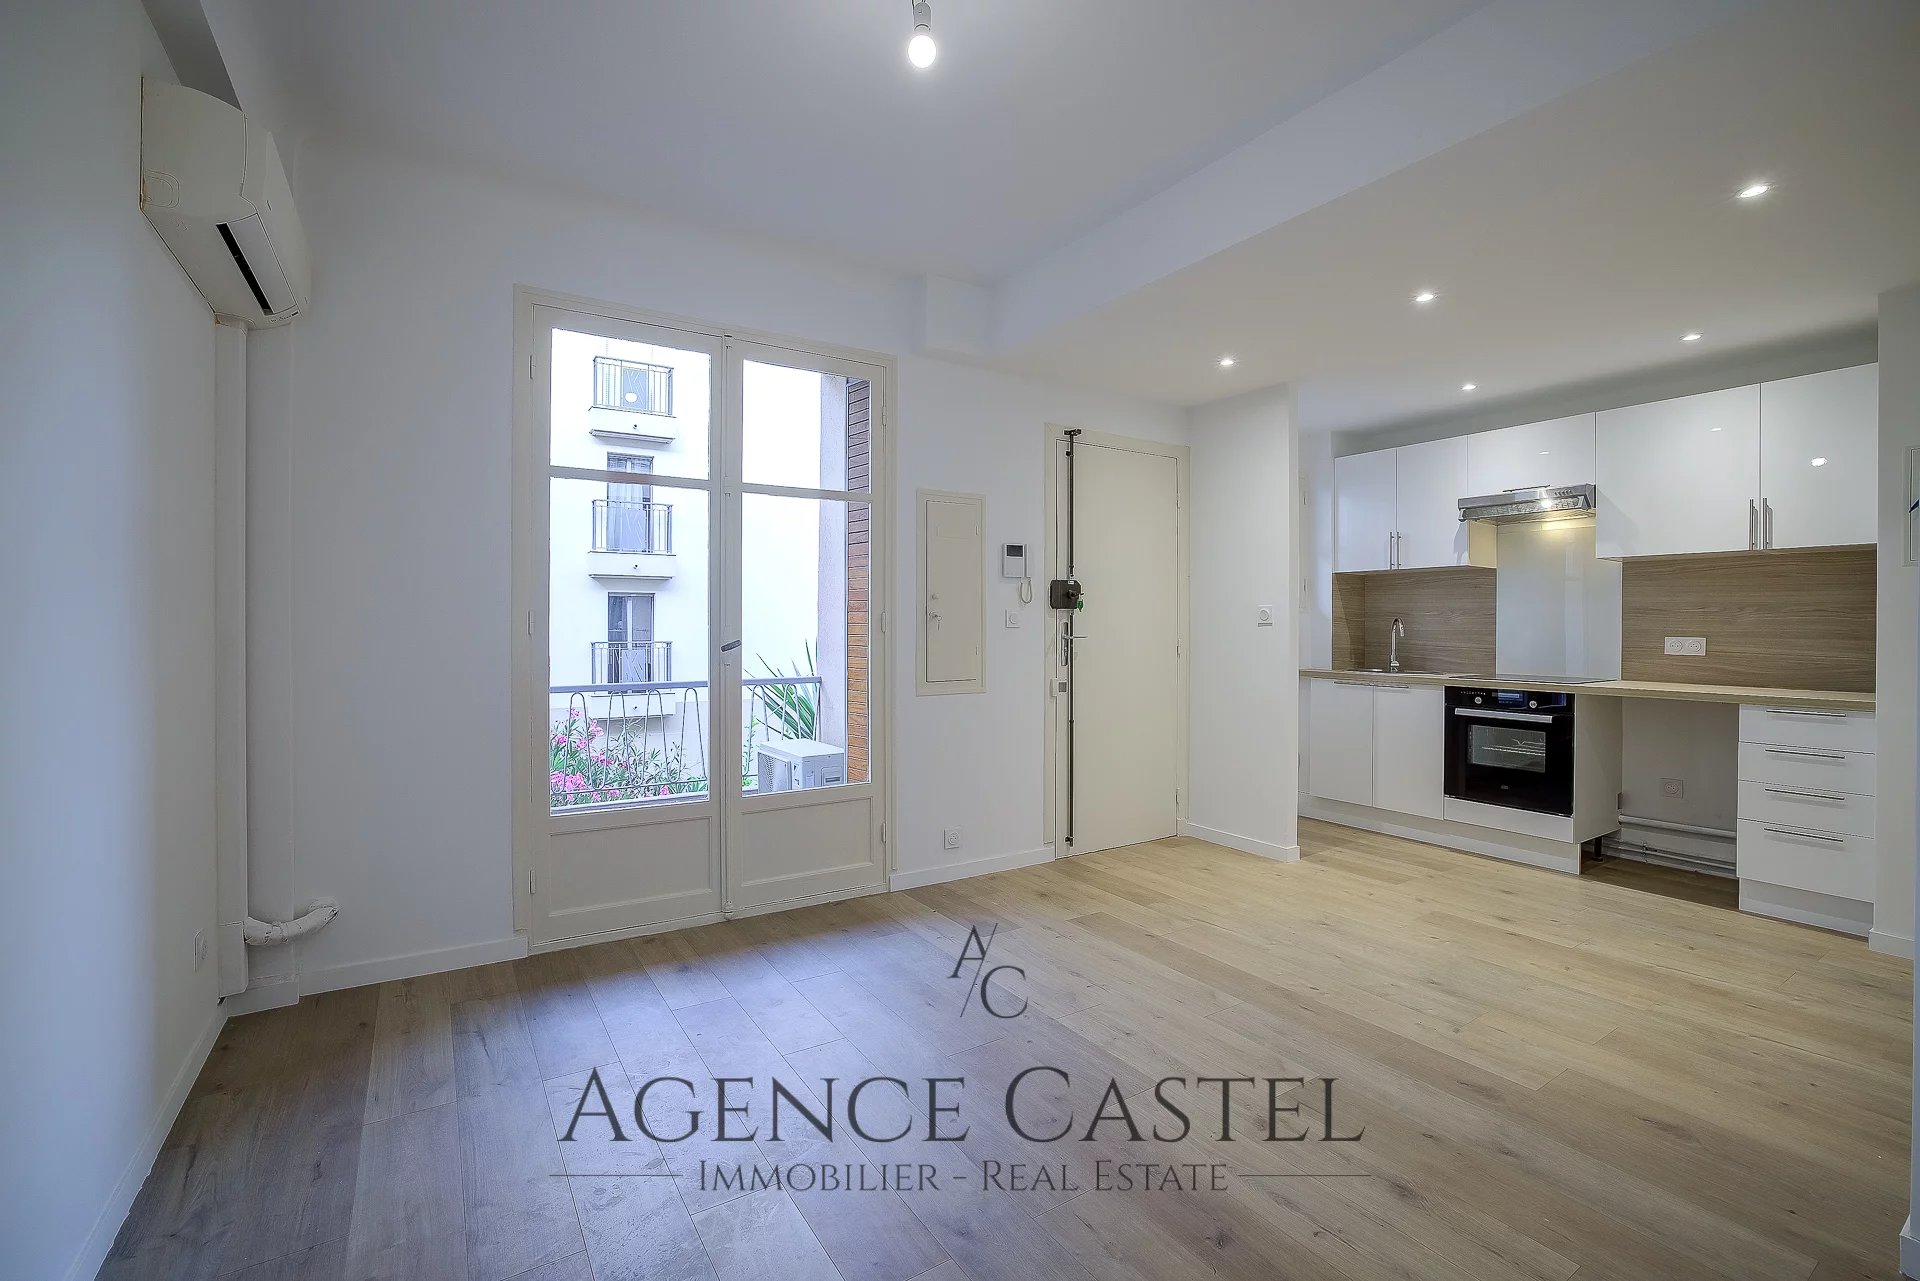 NICE CESSOLE - SUPERB 2 BEDROOM APARTMENT WITH BALCONY